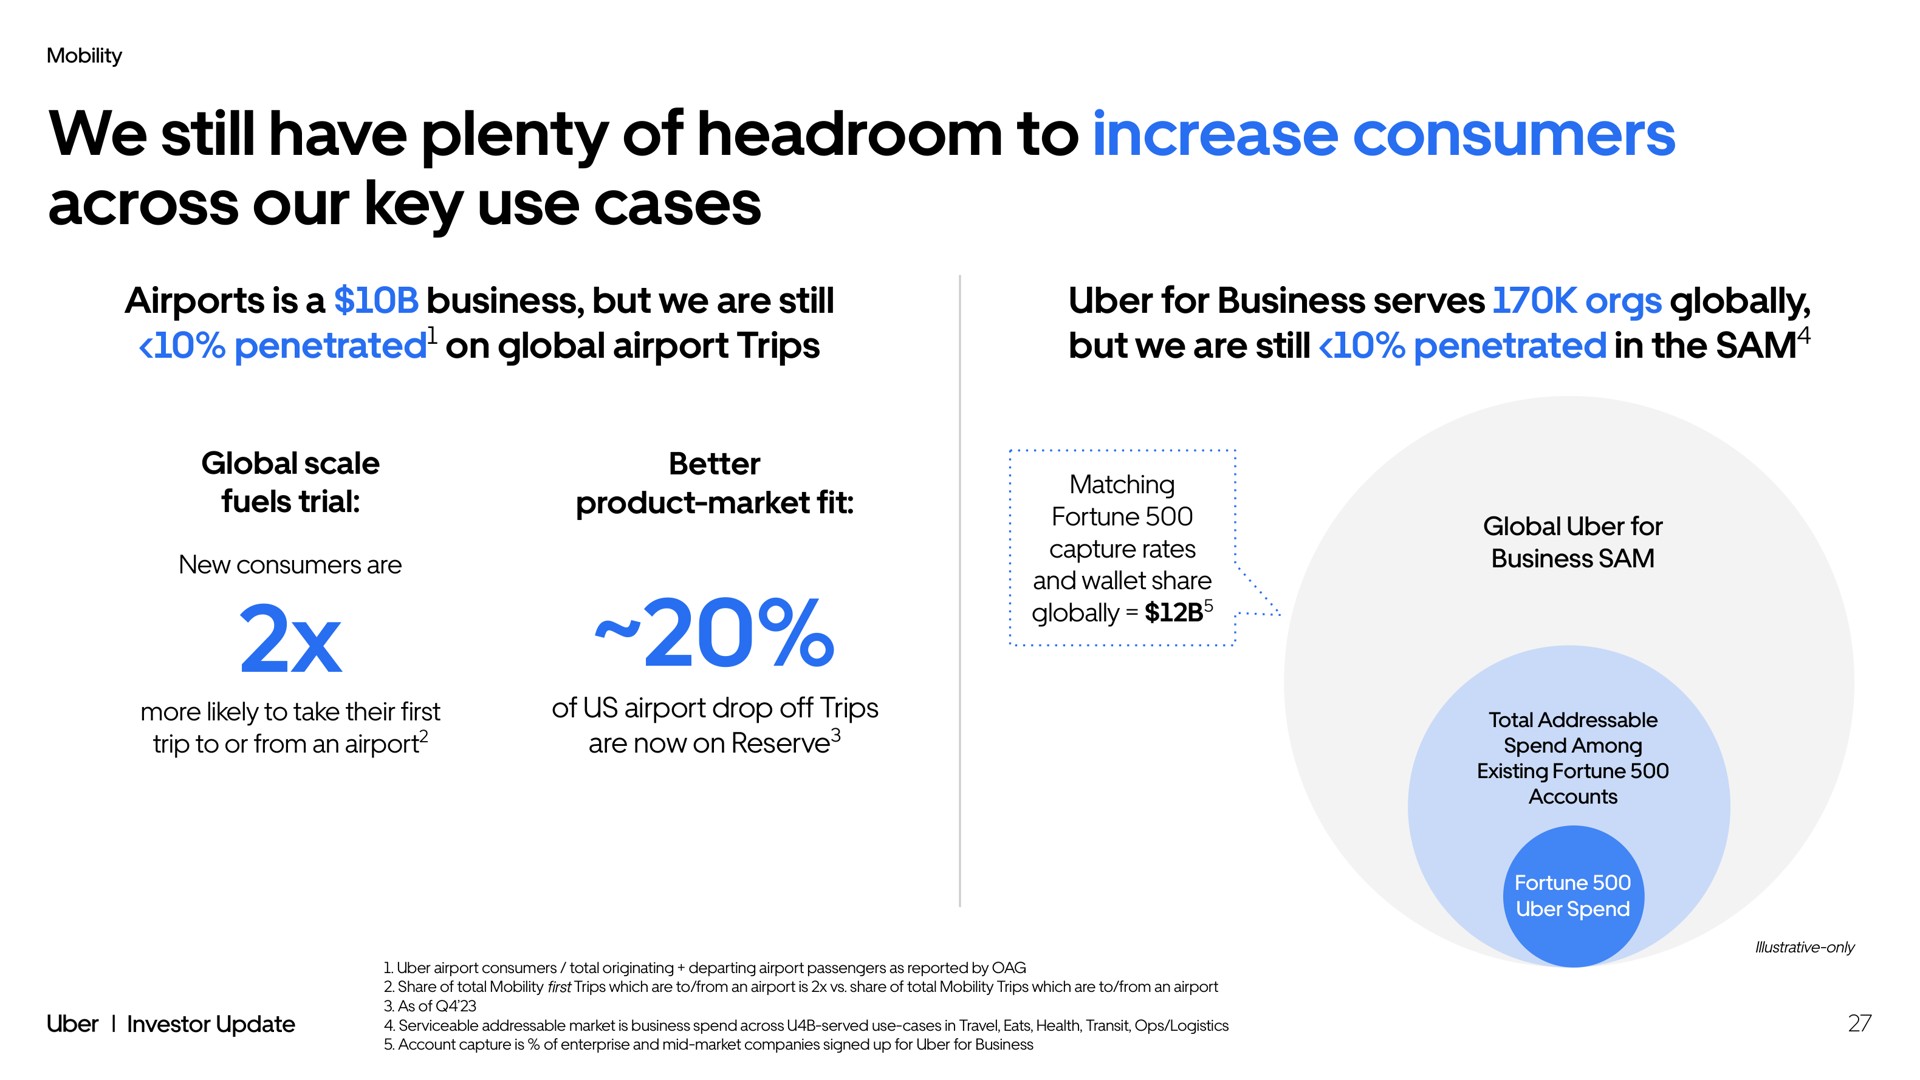 we still have plenty of headroom to increase consumers across our key use cases airports is a business but we are still penetrated on global airport trips for business serves globally but we are still penetrated in the sam oer | Uber